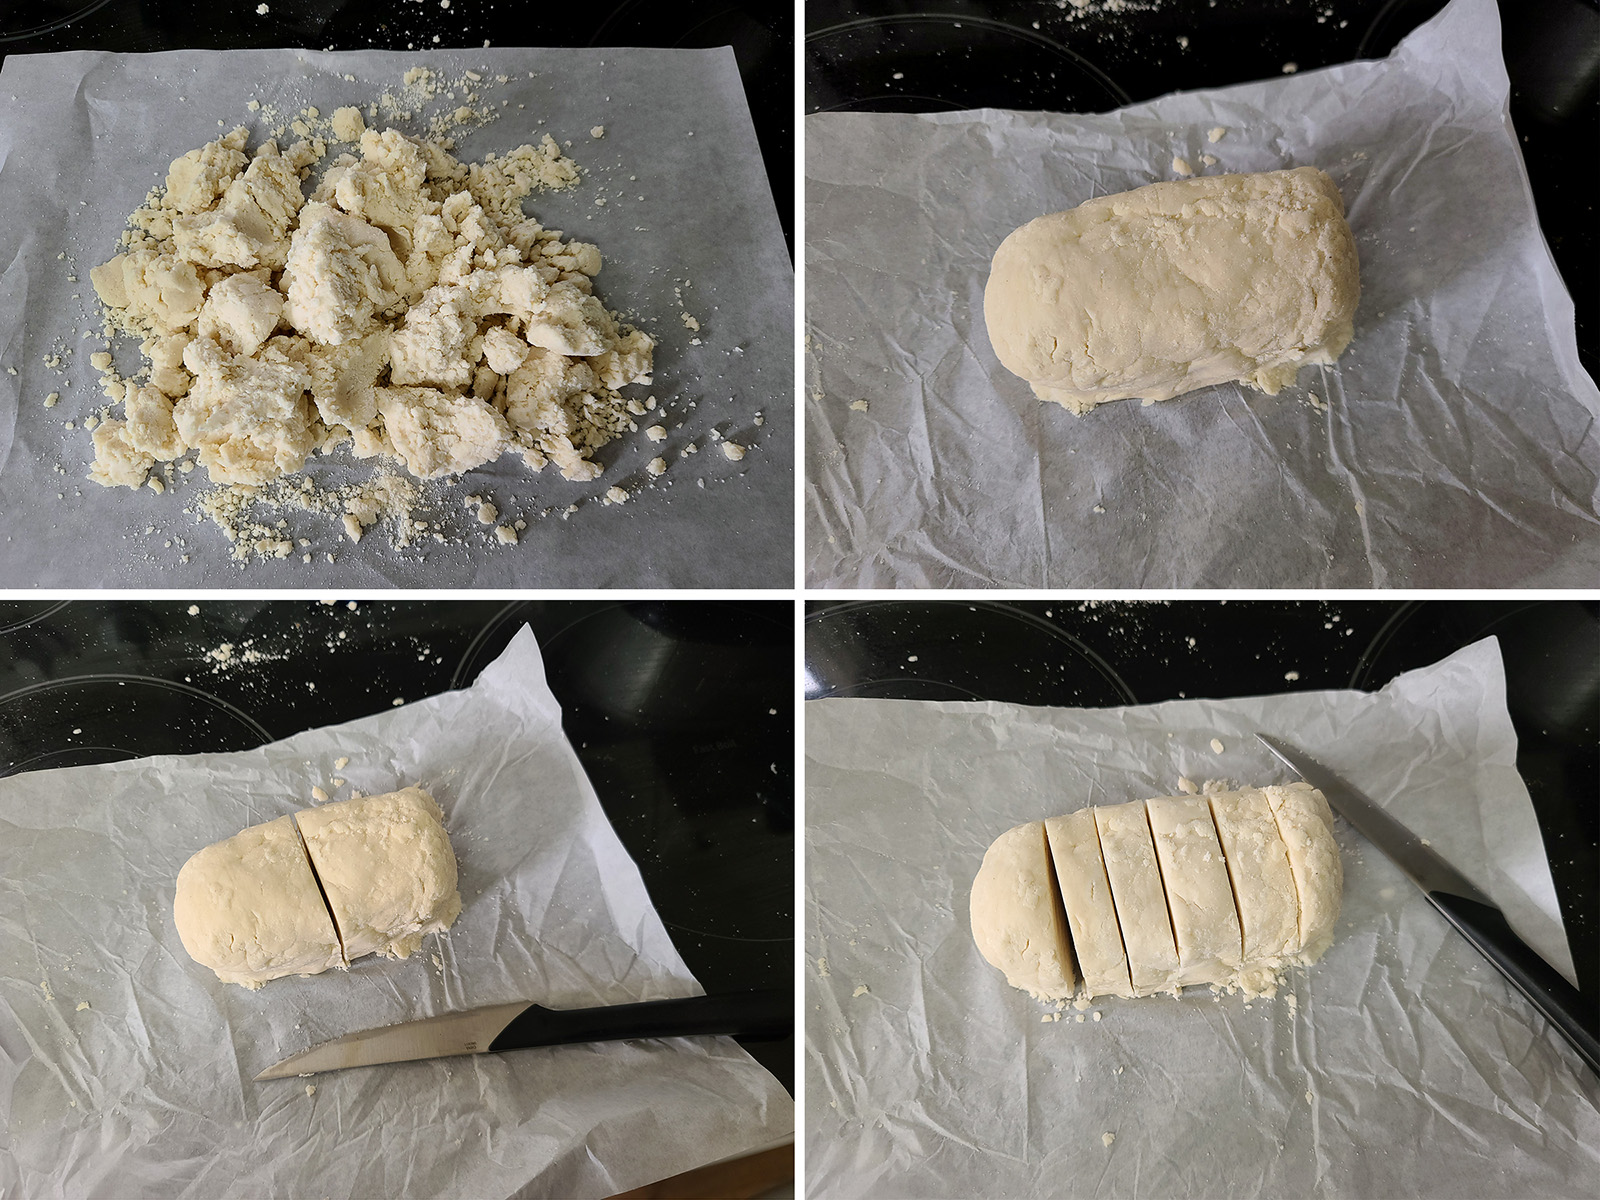 A 4 part image showing the dough being balled up into a log, sliced in half, and then sliced into 6 pieces total.